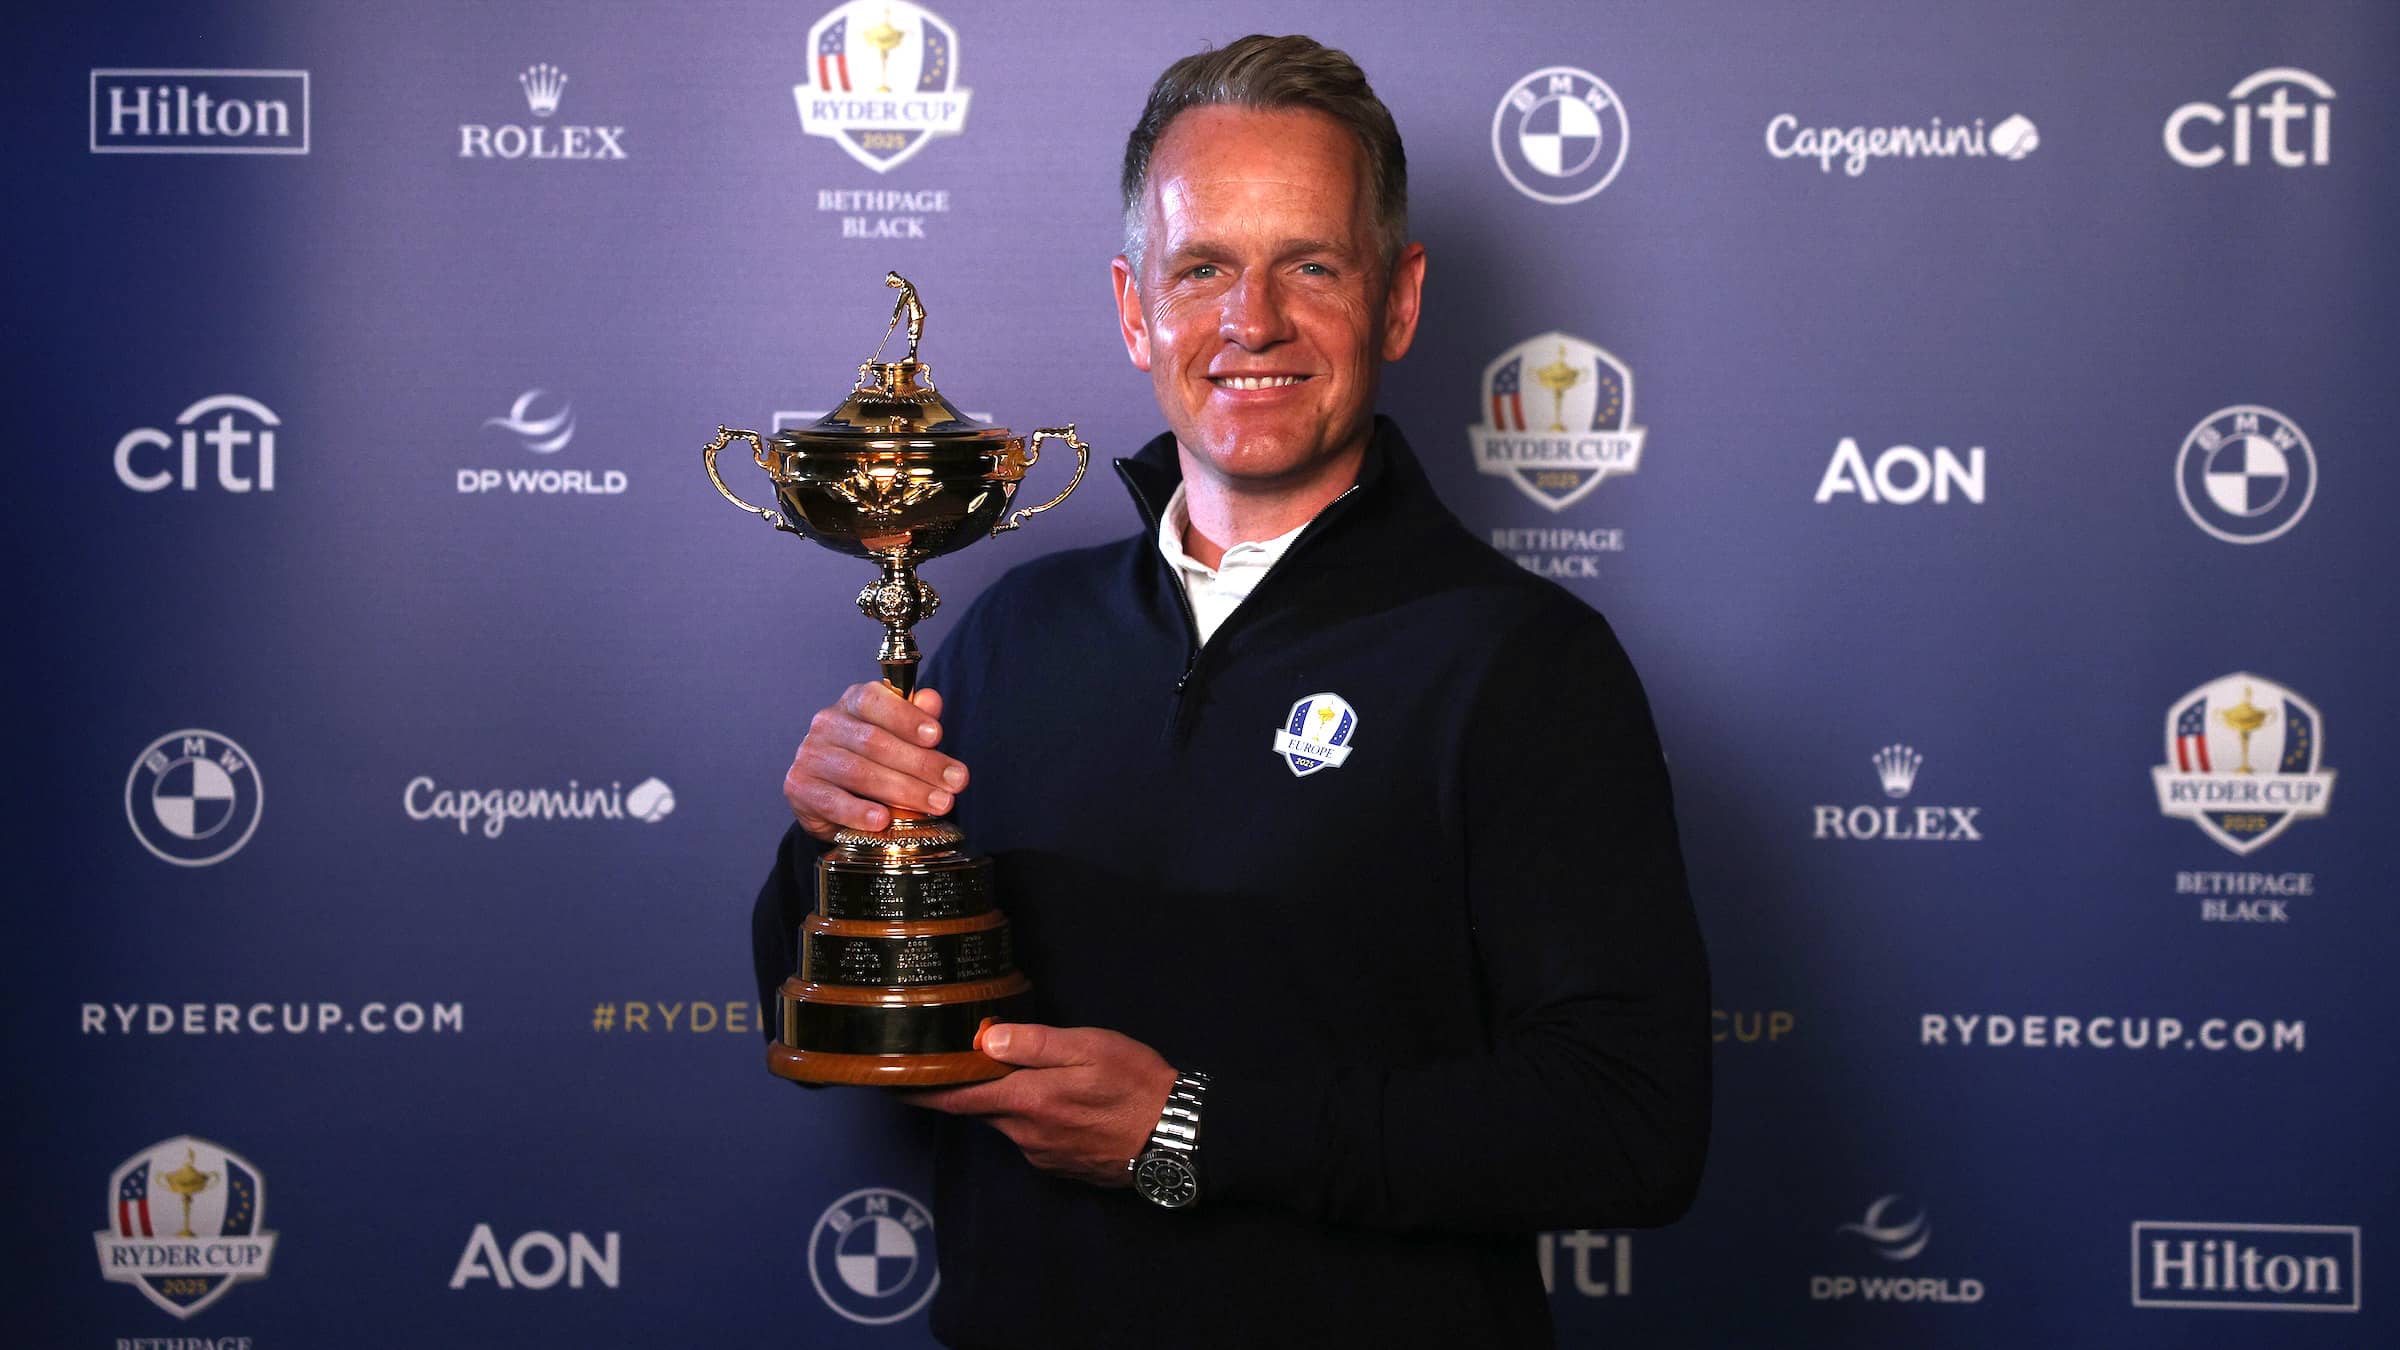 Luke Donald with Ryder Cup